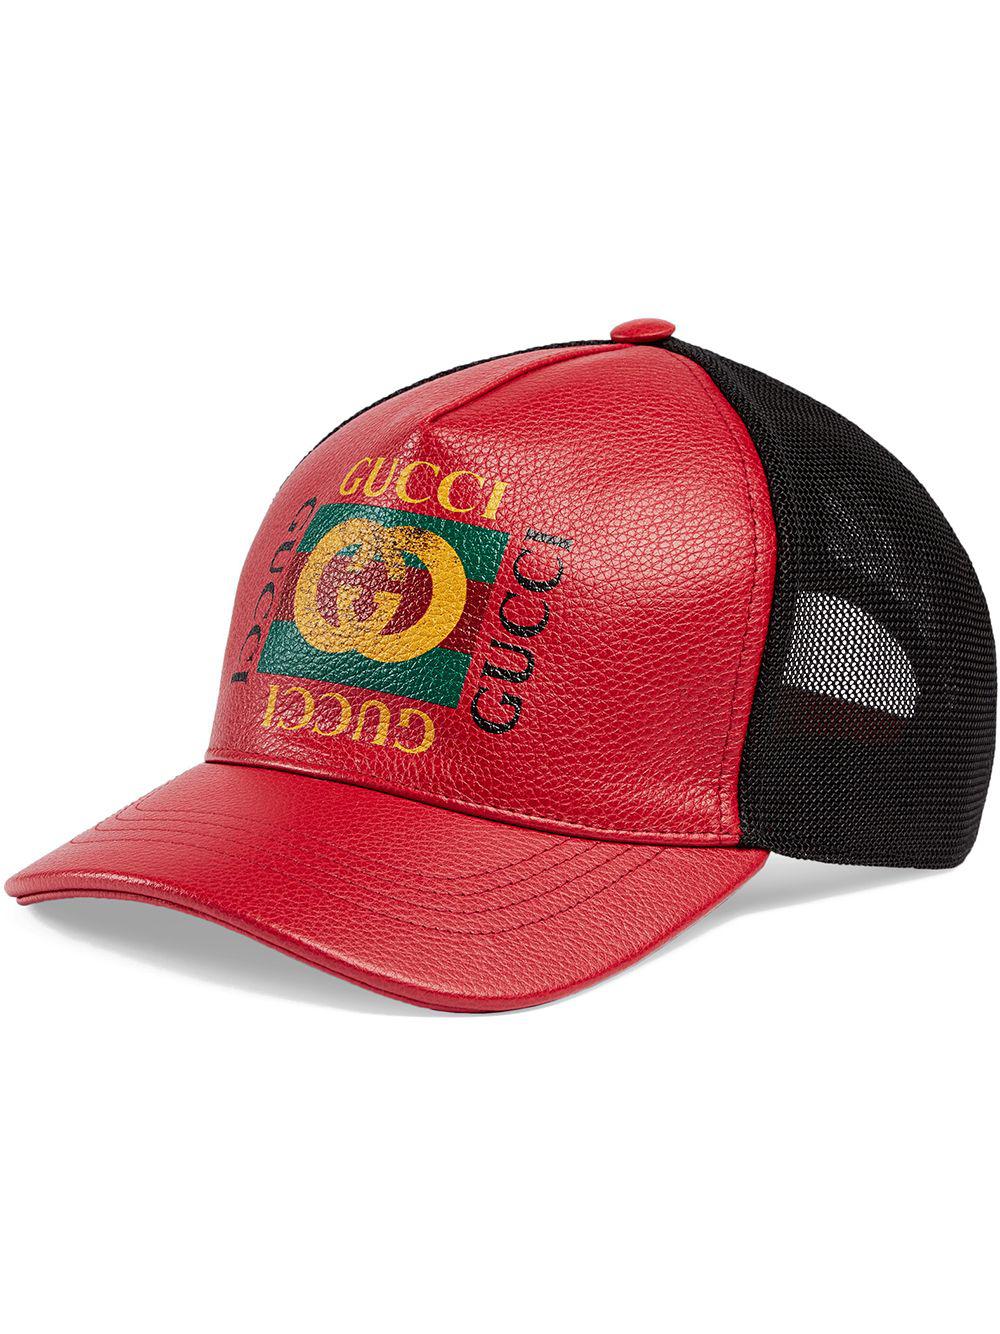 Top 39+ imagen red gucci hat